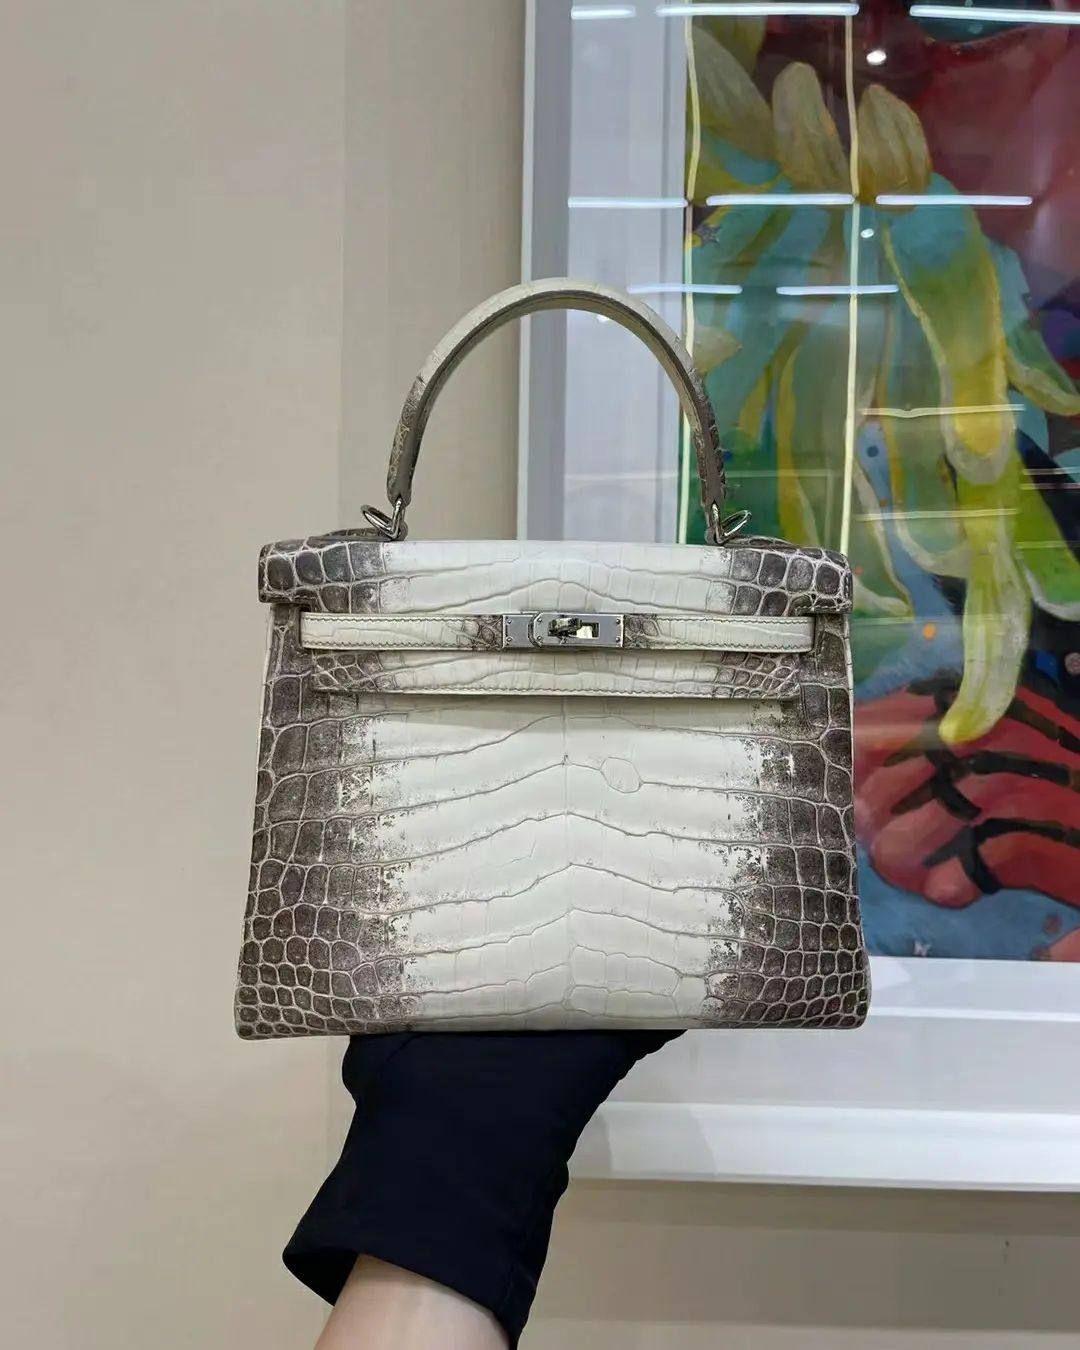 Hermes Kelly bag fetches record $346,802 at Sotheby's